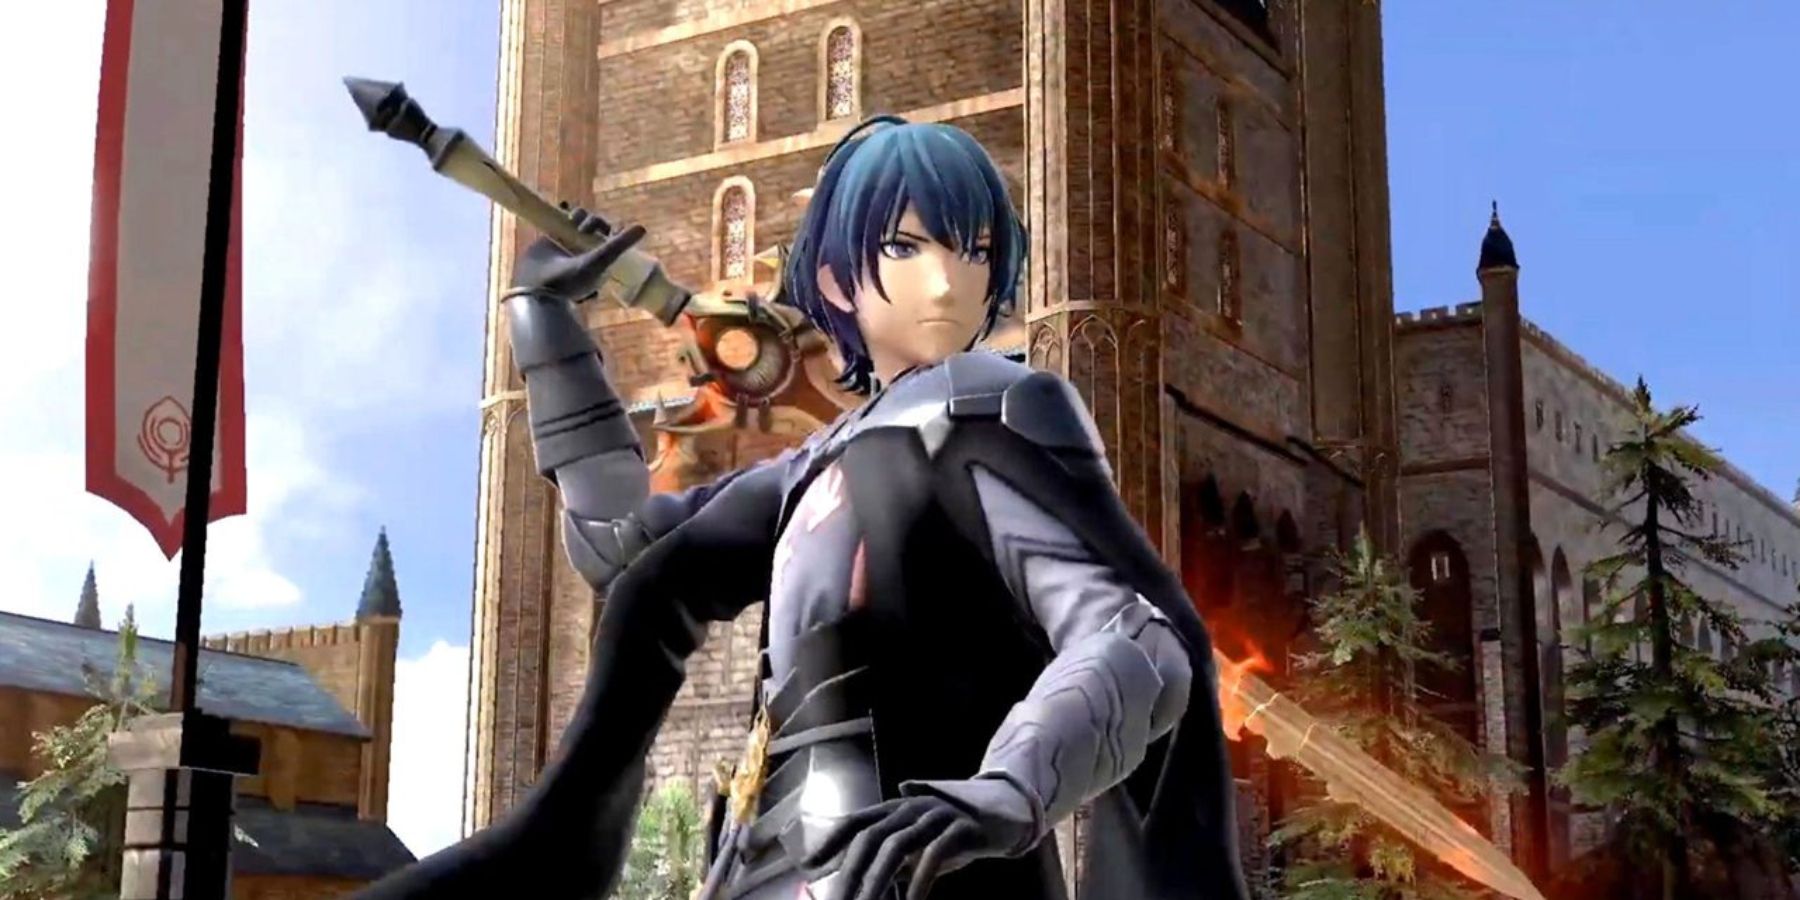  Byleth about to unsheath his sword